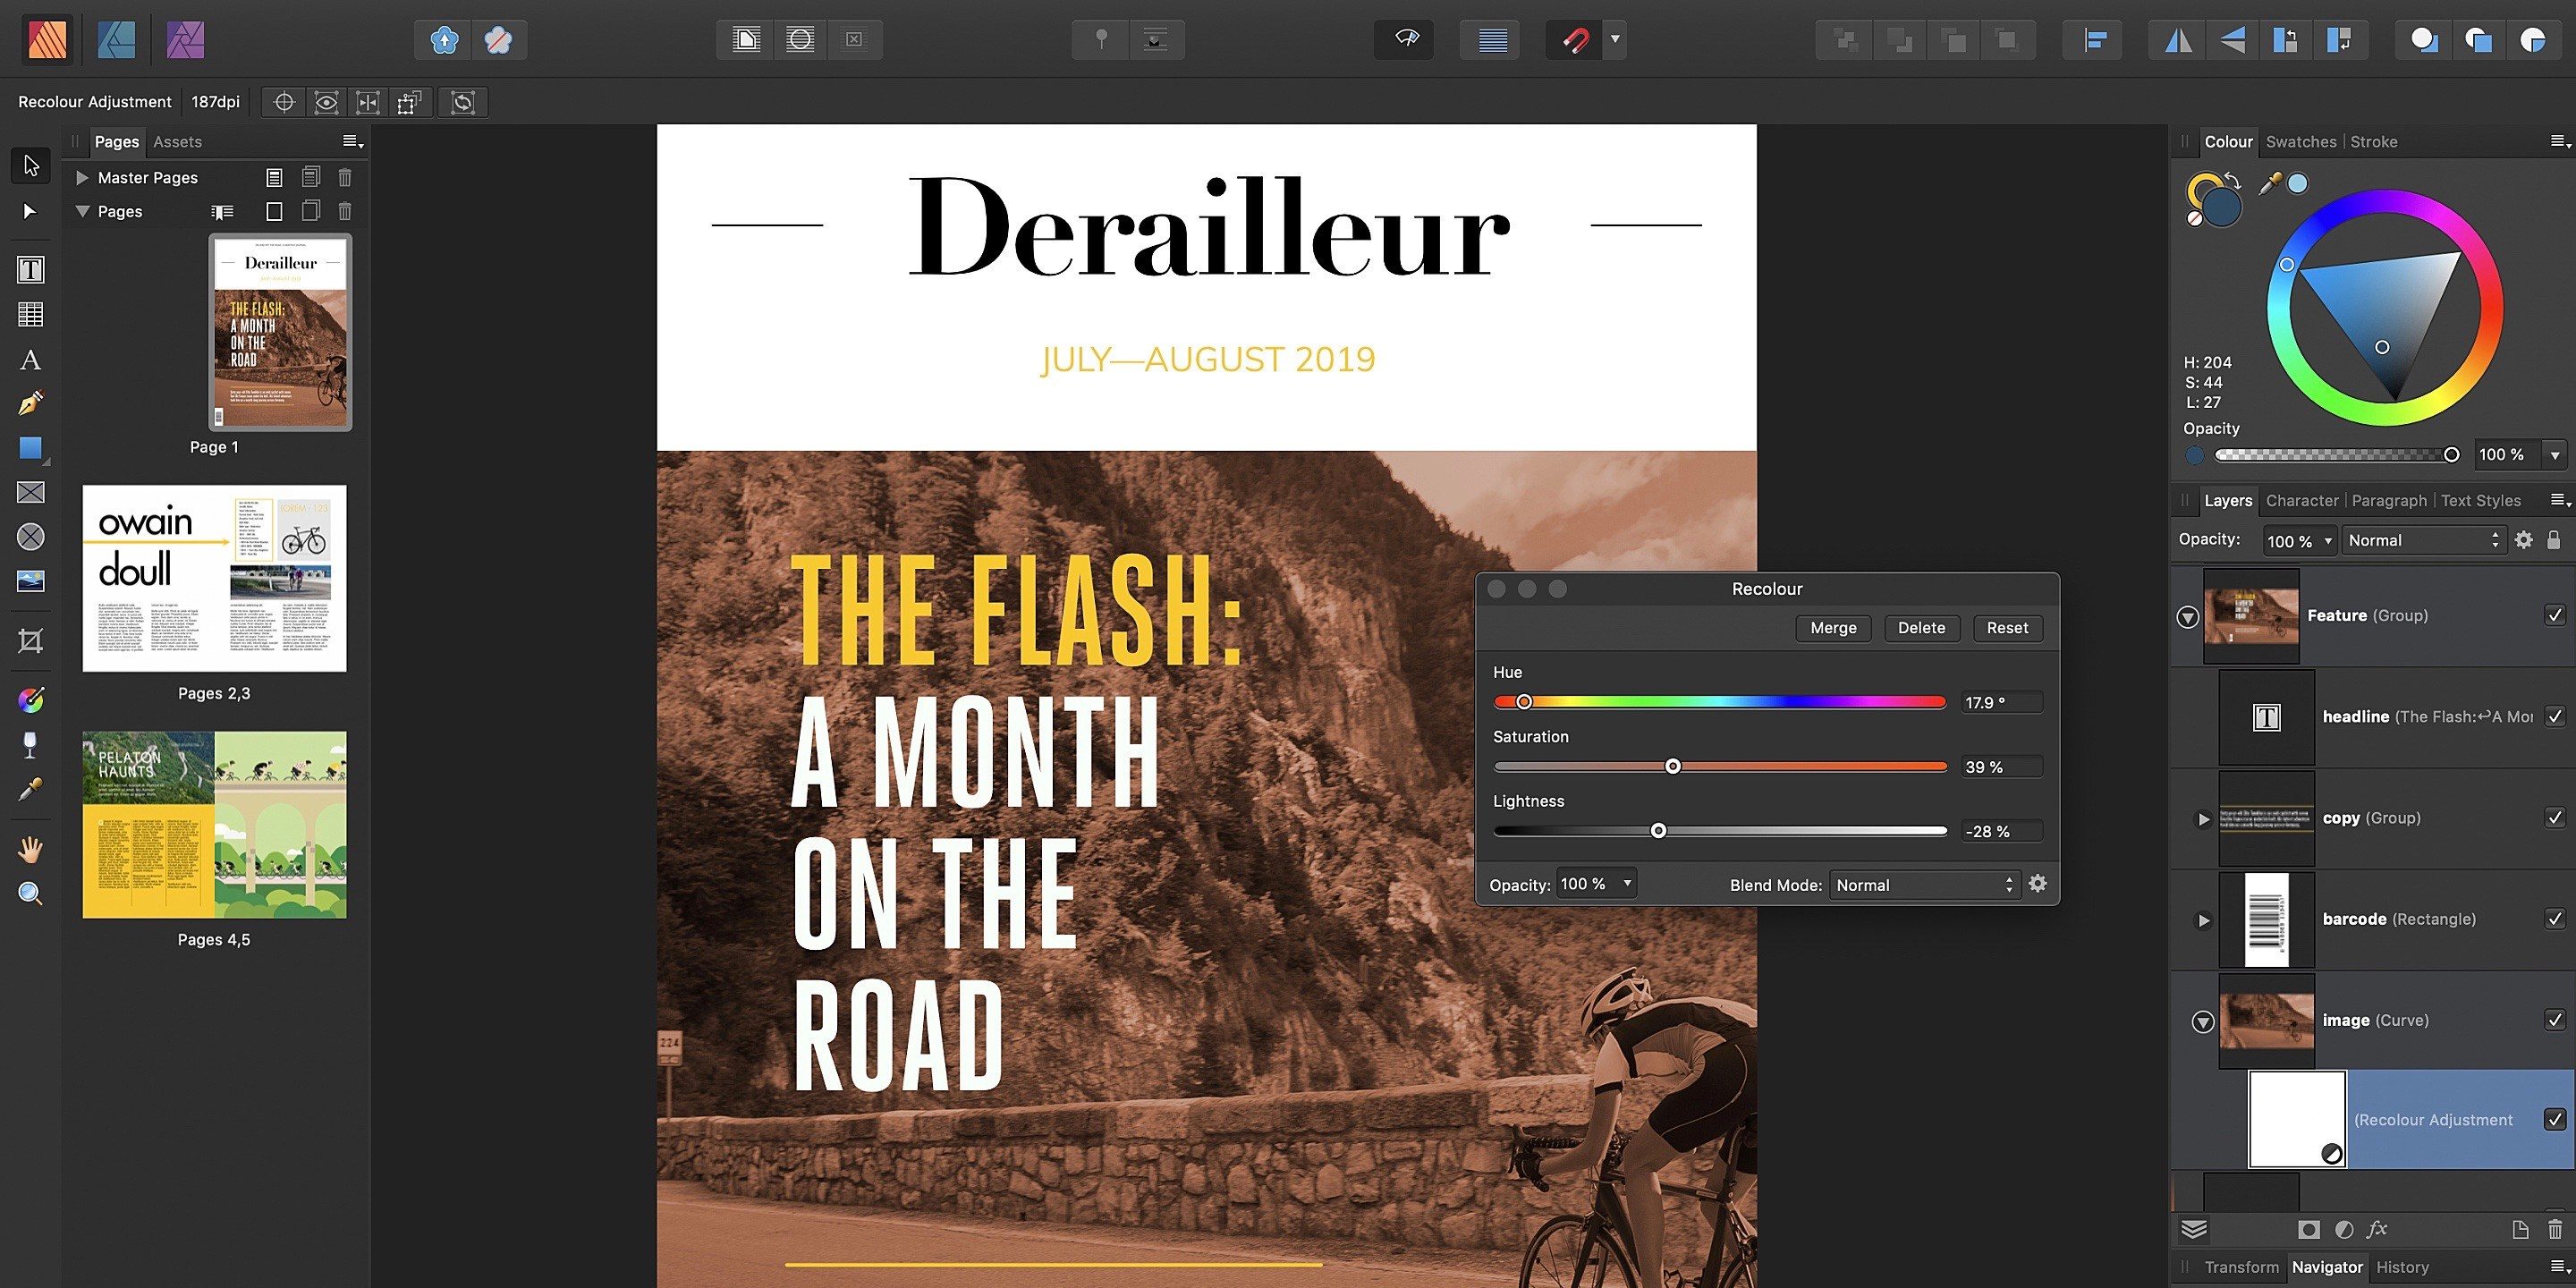 download the new version for apple Affinity Publisher